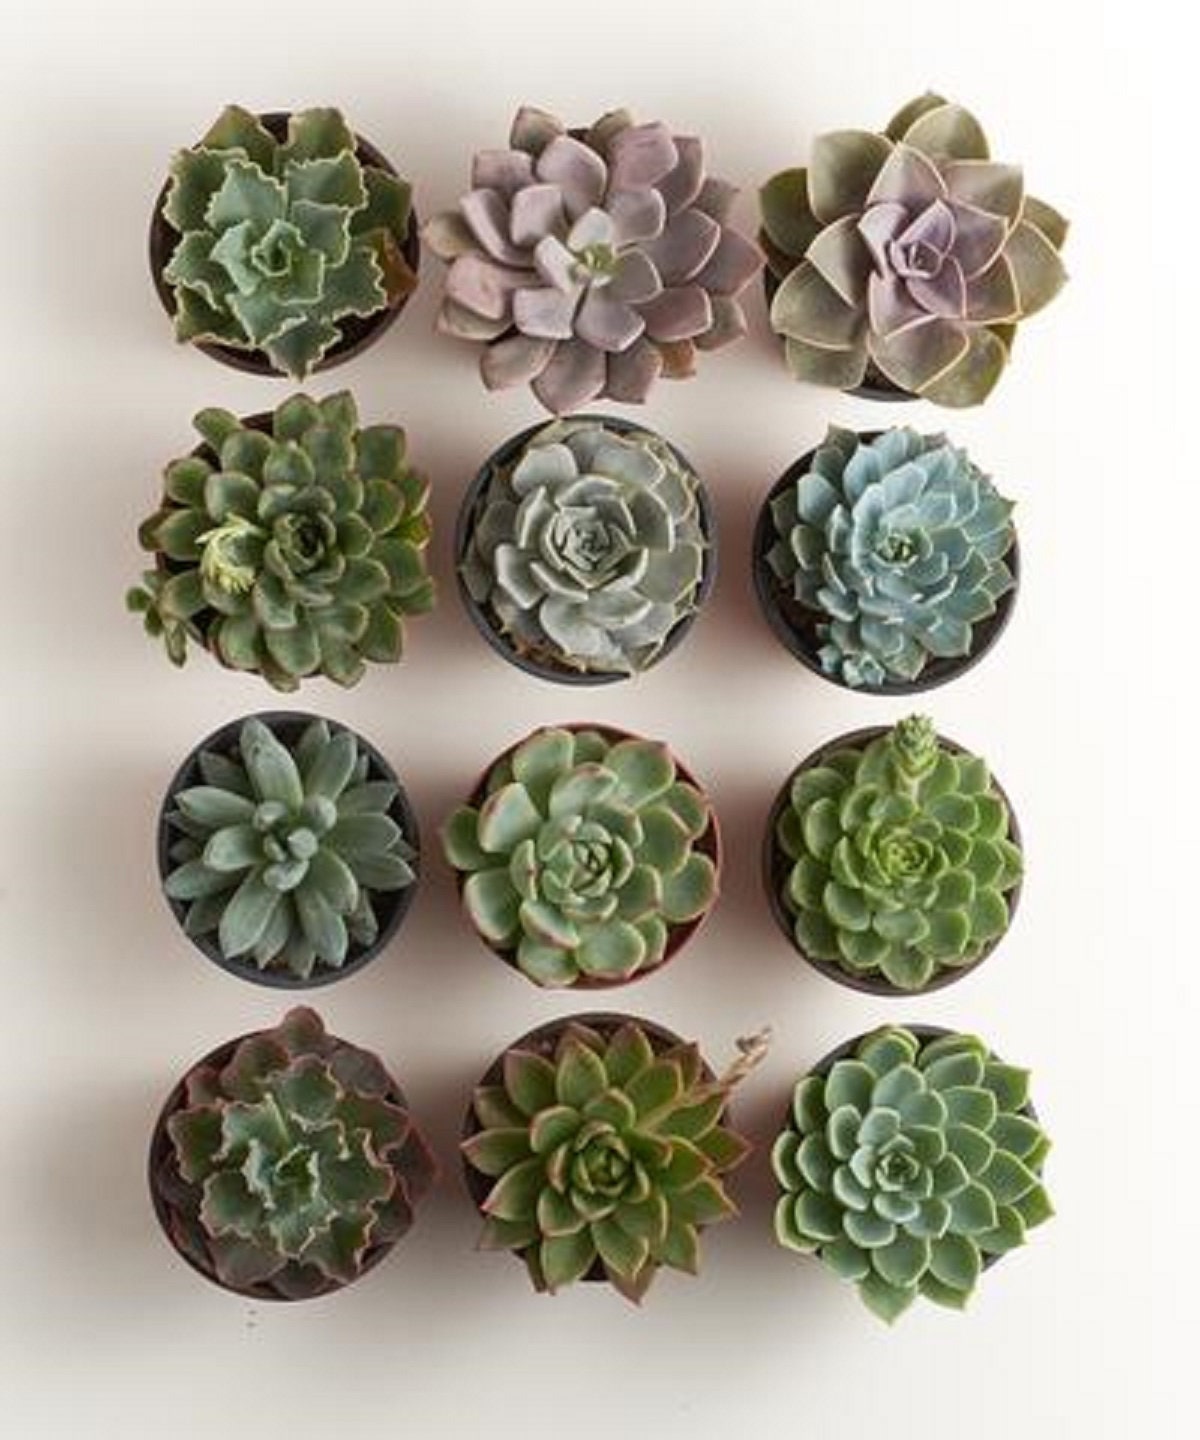  Birthday Gifts for Women,Bestfriend Gifts for Women,Unique Gift  Ideas for Birthday,Inspirational Gifts for Women,Graduation Gifts, Plastic  Succulent Pots Gifts with Gift Boxed(You are Loved) : Patio, Lawn & Garden